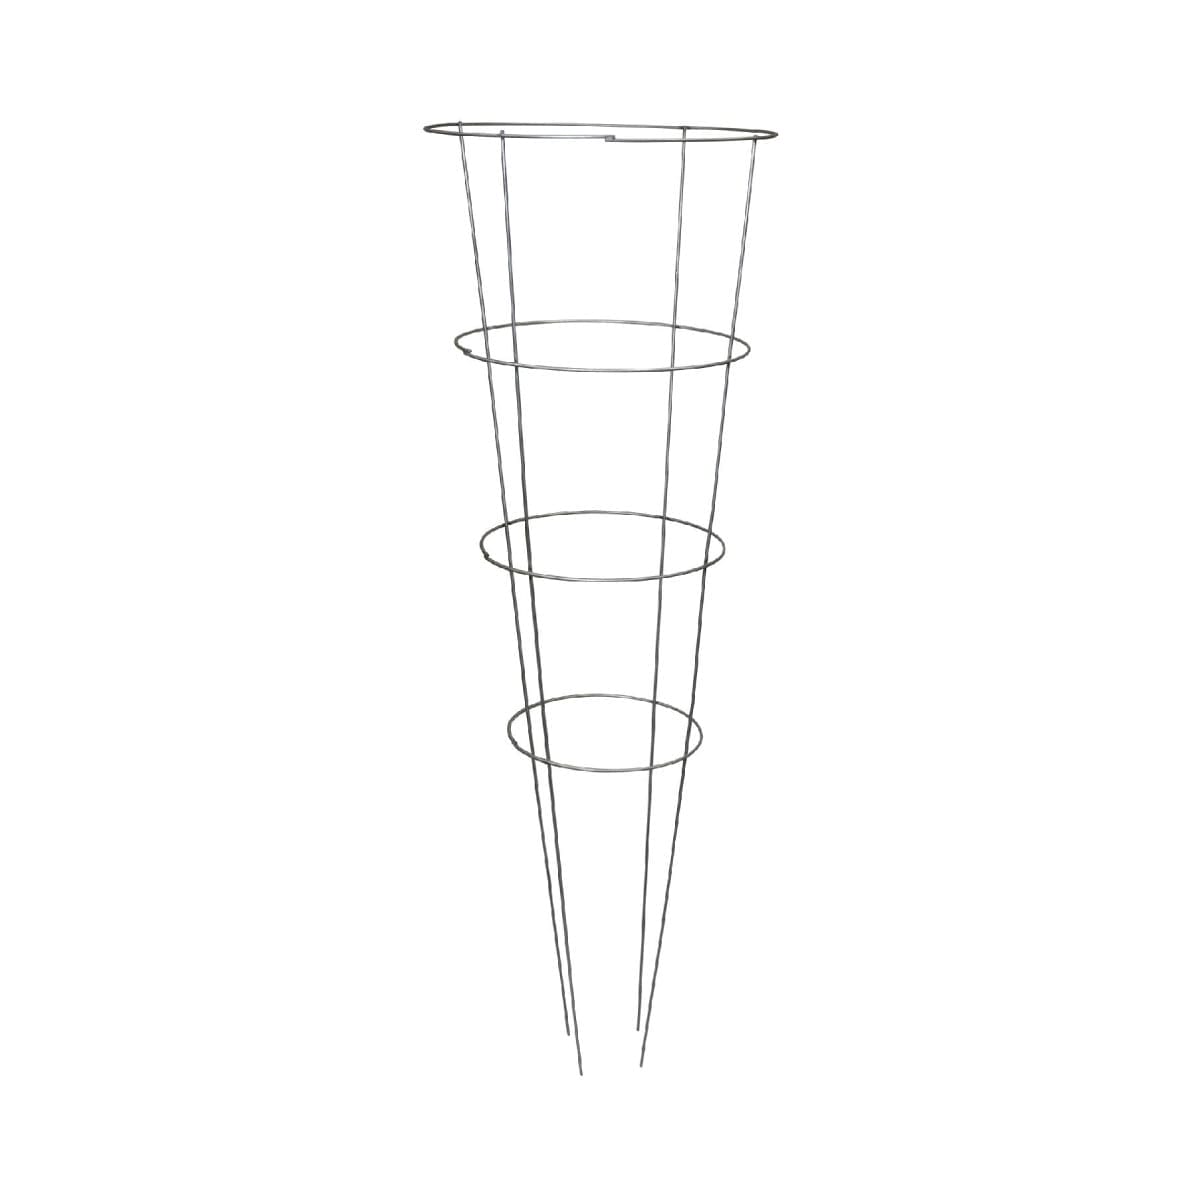 Shop Plant Stakes & Cages in | HTG Supply Online Store